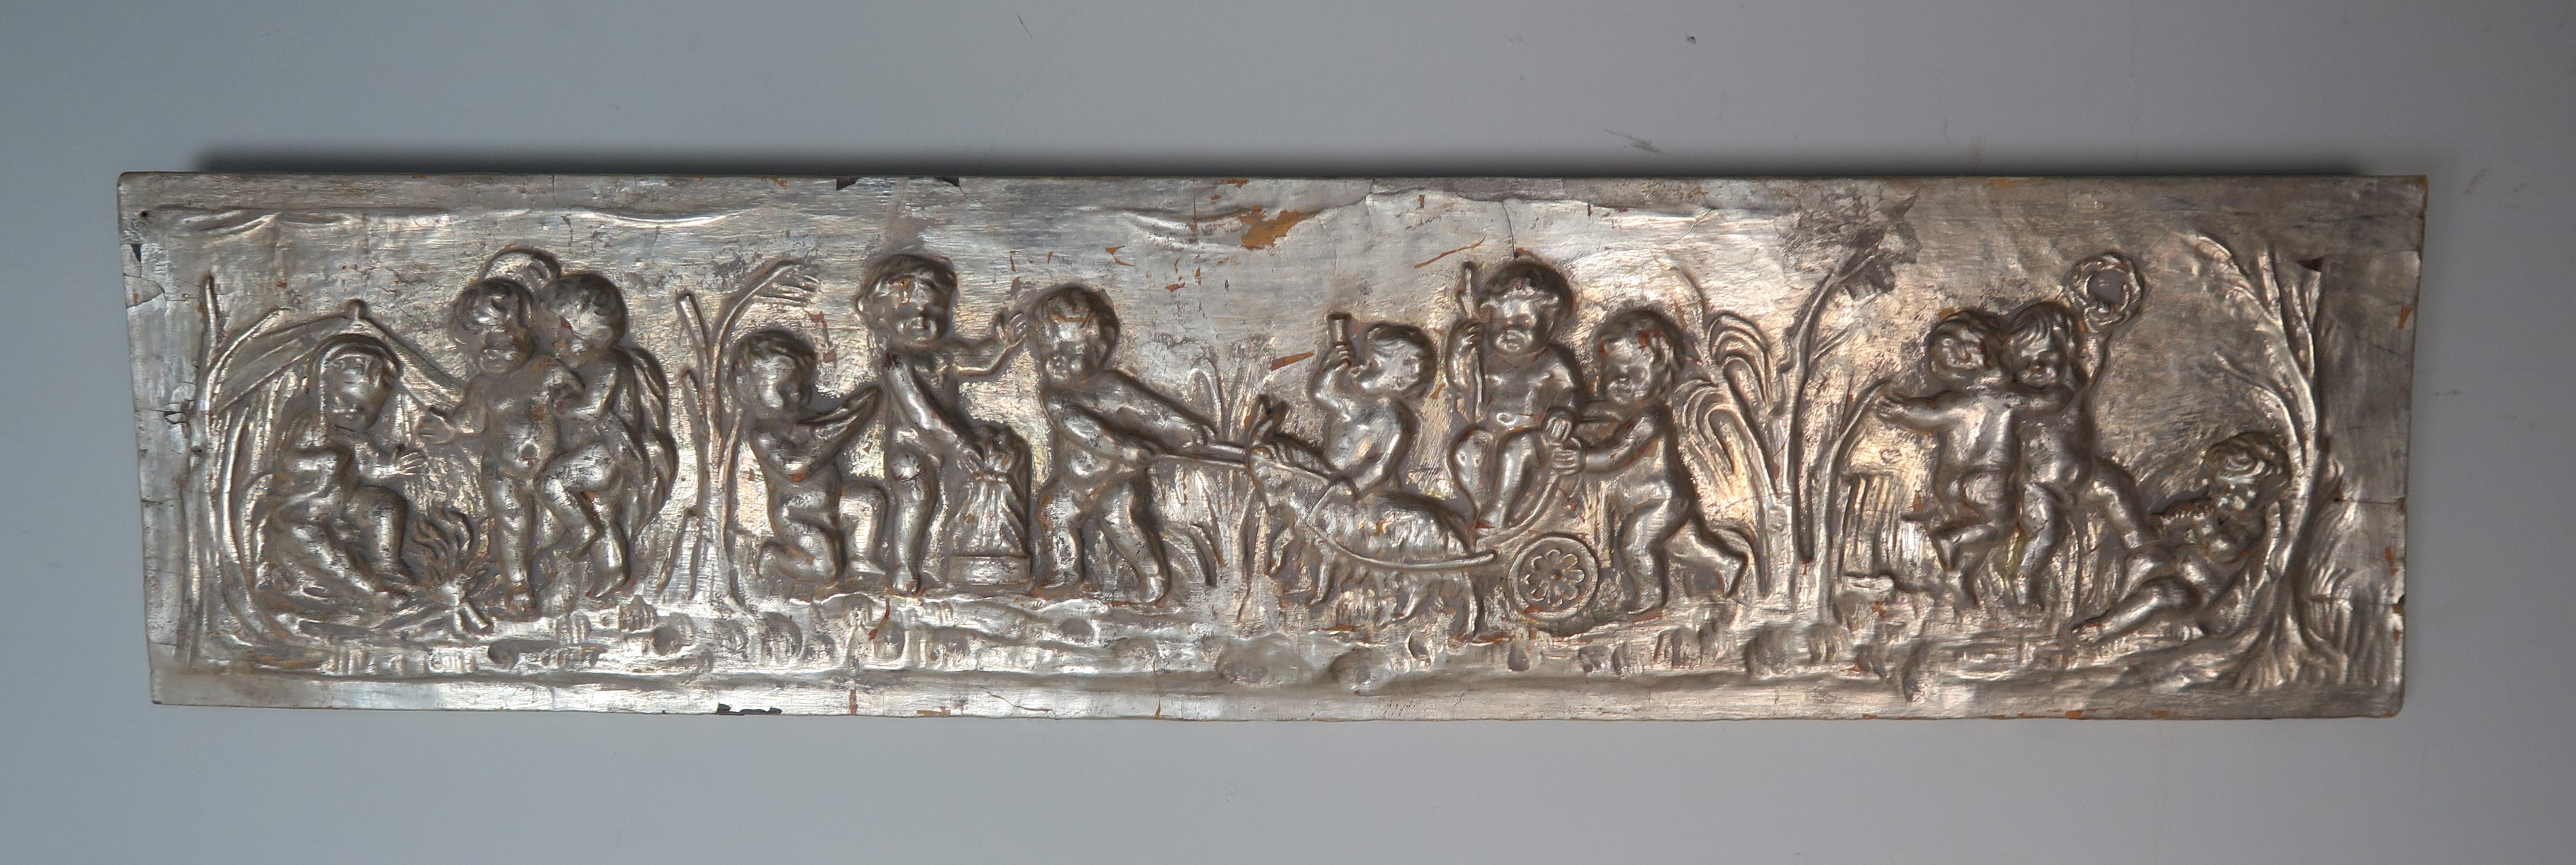 19th century silver gilt carved wood panel depicting a dozen cherubs in four scenes (the four seasons possibly).